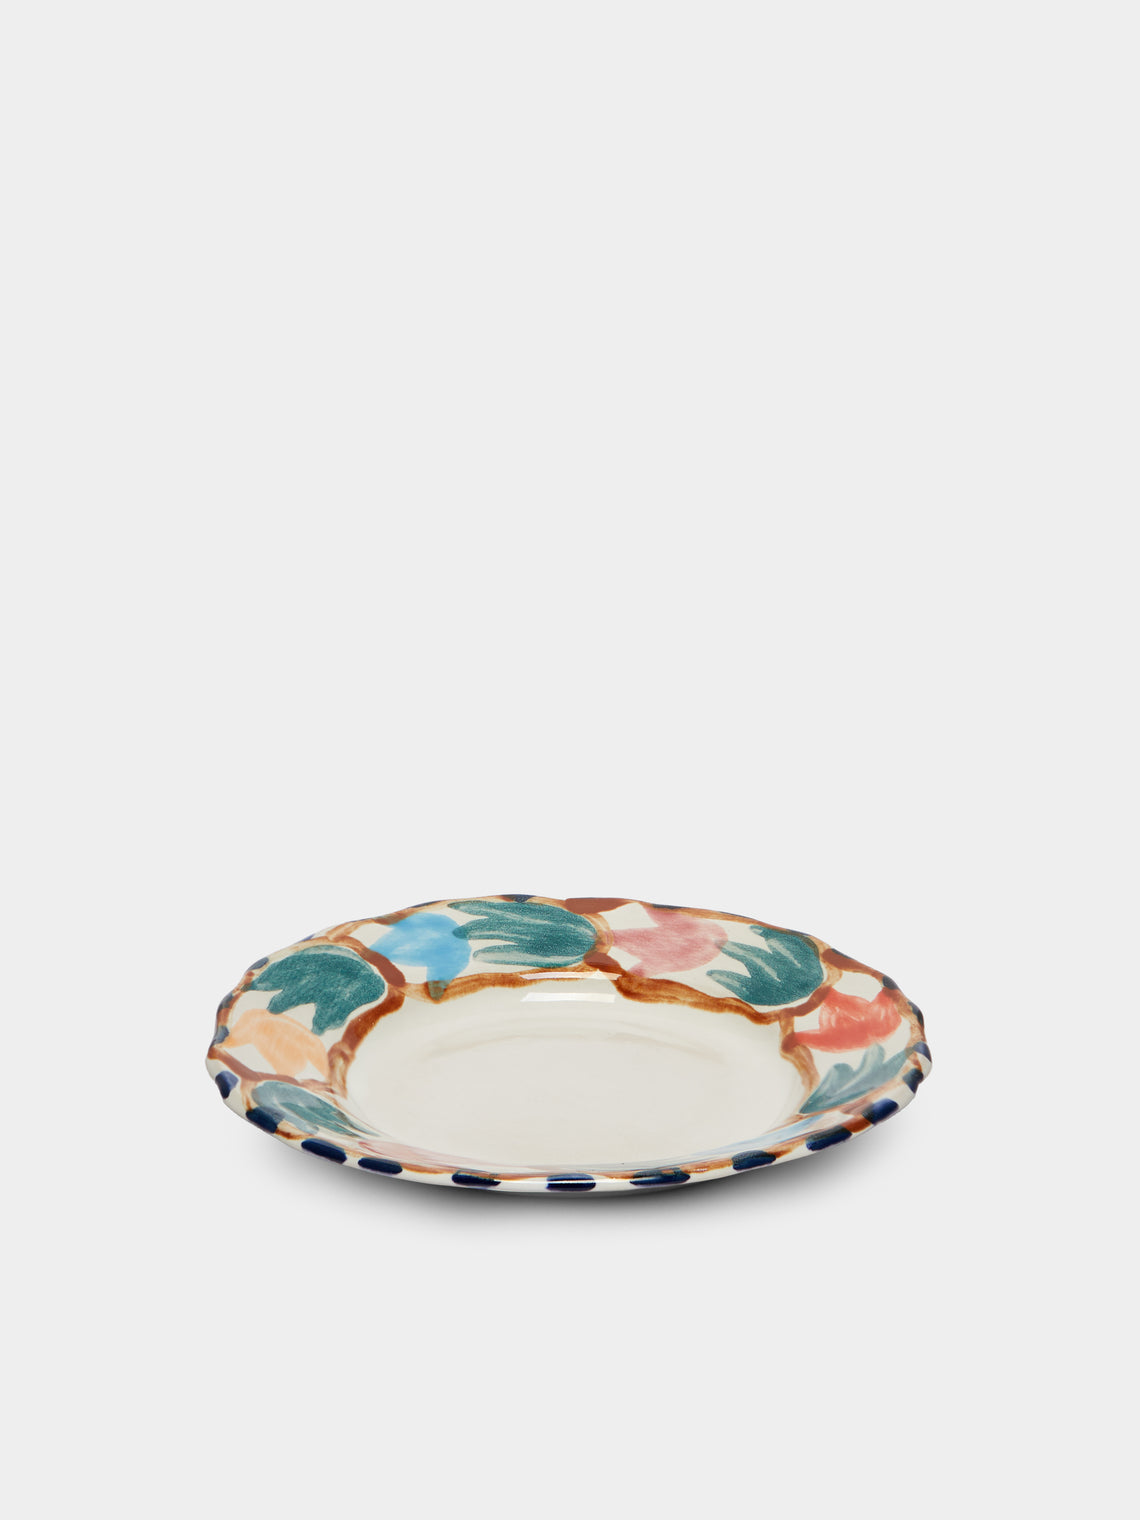 Zsuzsanna Nyul - Hand-Painted Small Side Plate -  - ABASK